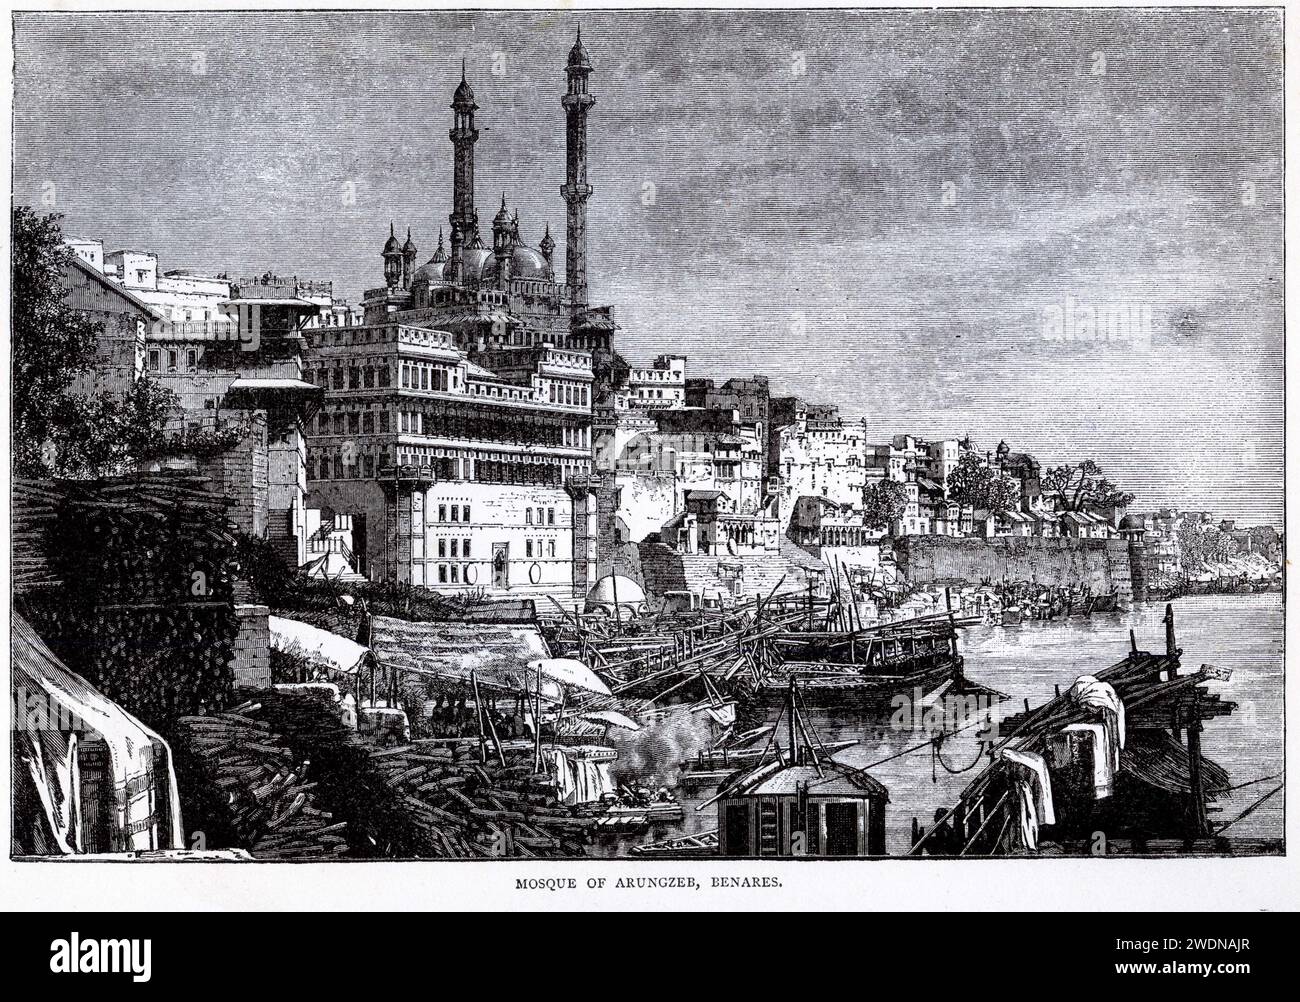 Engraving of the Mosque of Aurangzeb, now known as the Gyanvapi Mosque, on the banks of the River Ganges in the city of Benares. Benares is more commonly known as Varanasi and is of great religious significance to Hinduism. Stock Photo